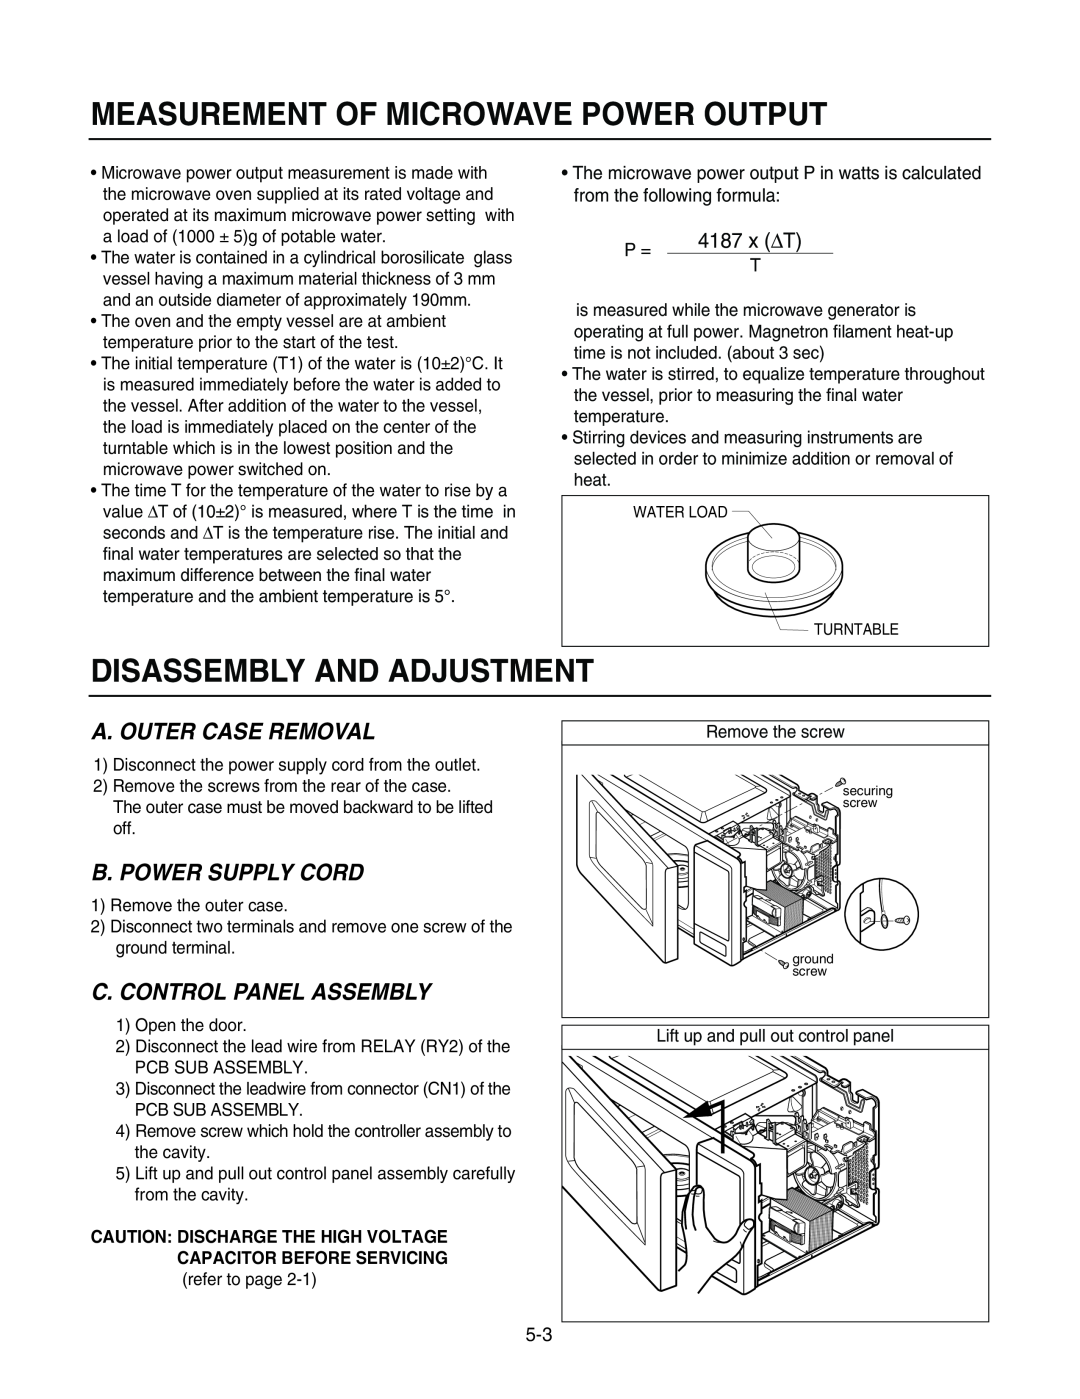 GE LMAB1240ST Measurement Of Microwave Power Output, Disassembly And Adjustment, A. Outer Case Removal, 4187 x ∆T 